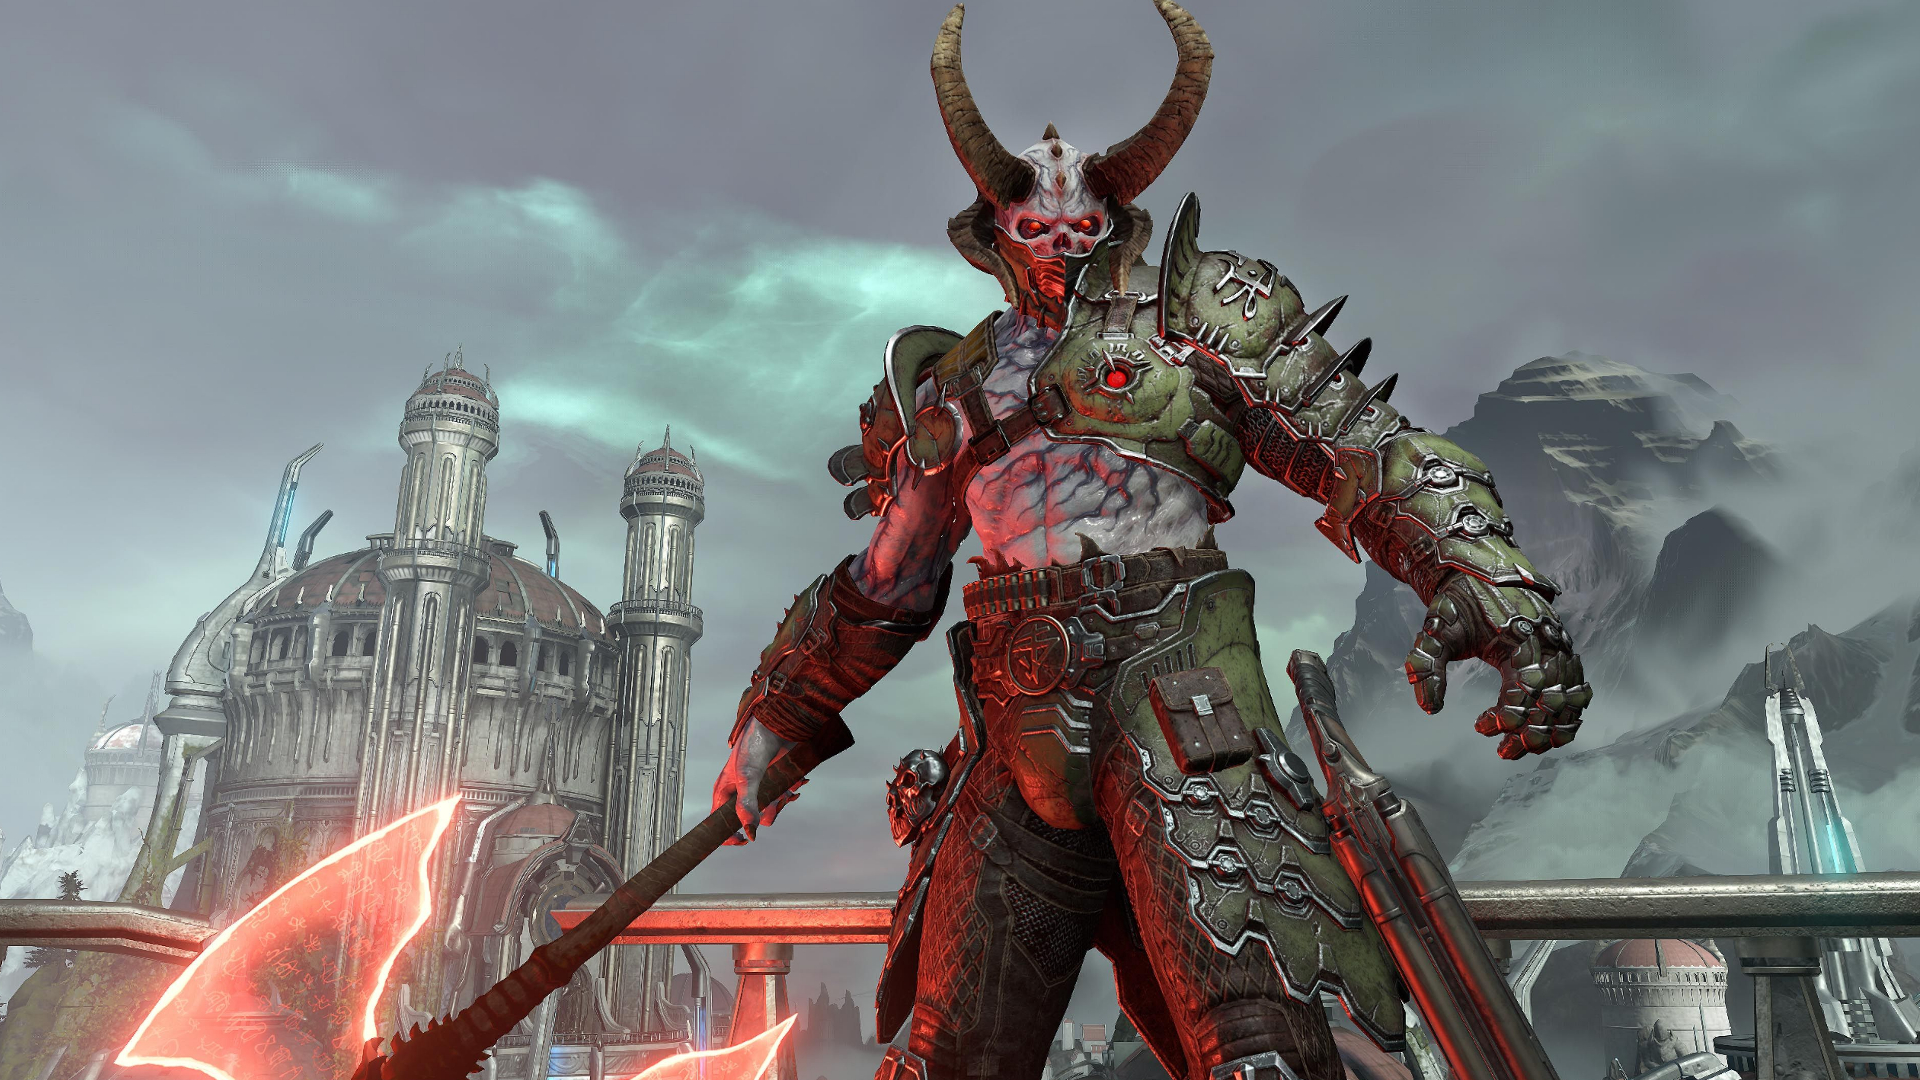 Doom Eternal now requires denuvo driver installation in order to